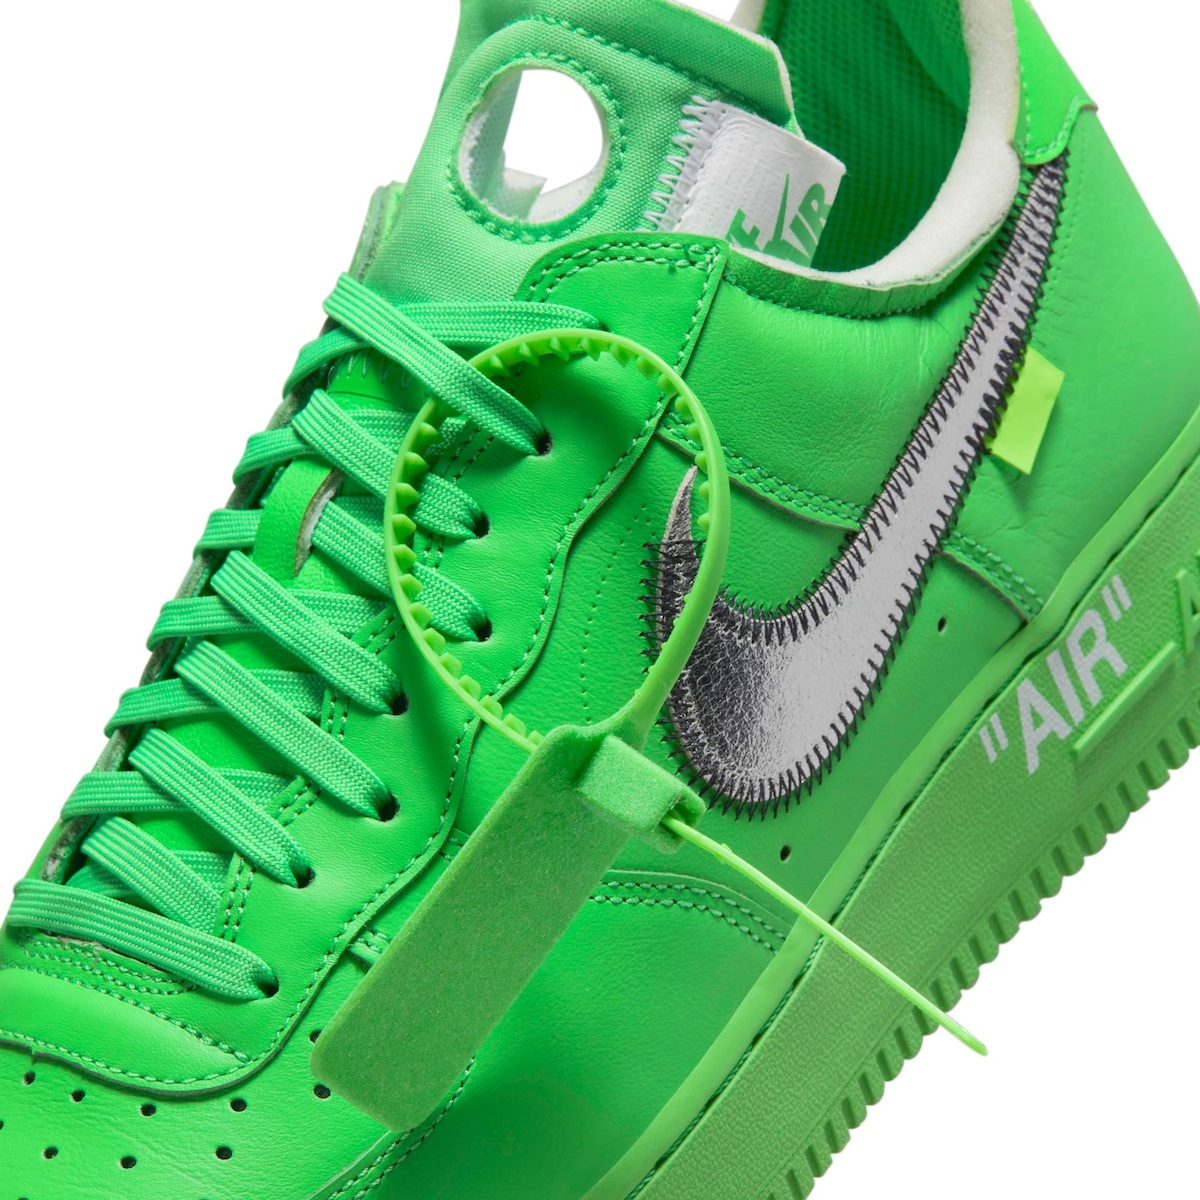 Off-White Nike Air Force 1 Low Light Green Spark DX1419-300 Release Date